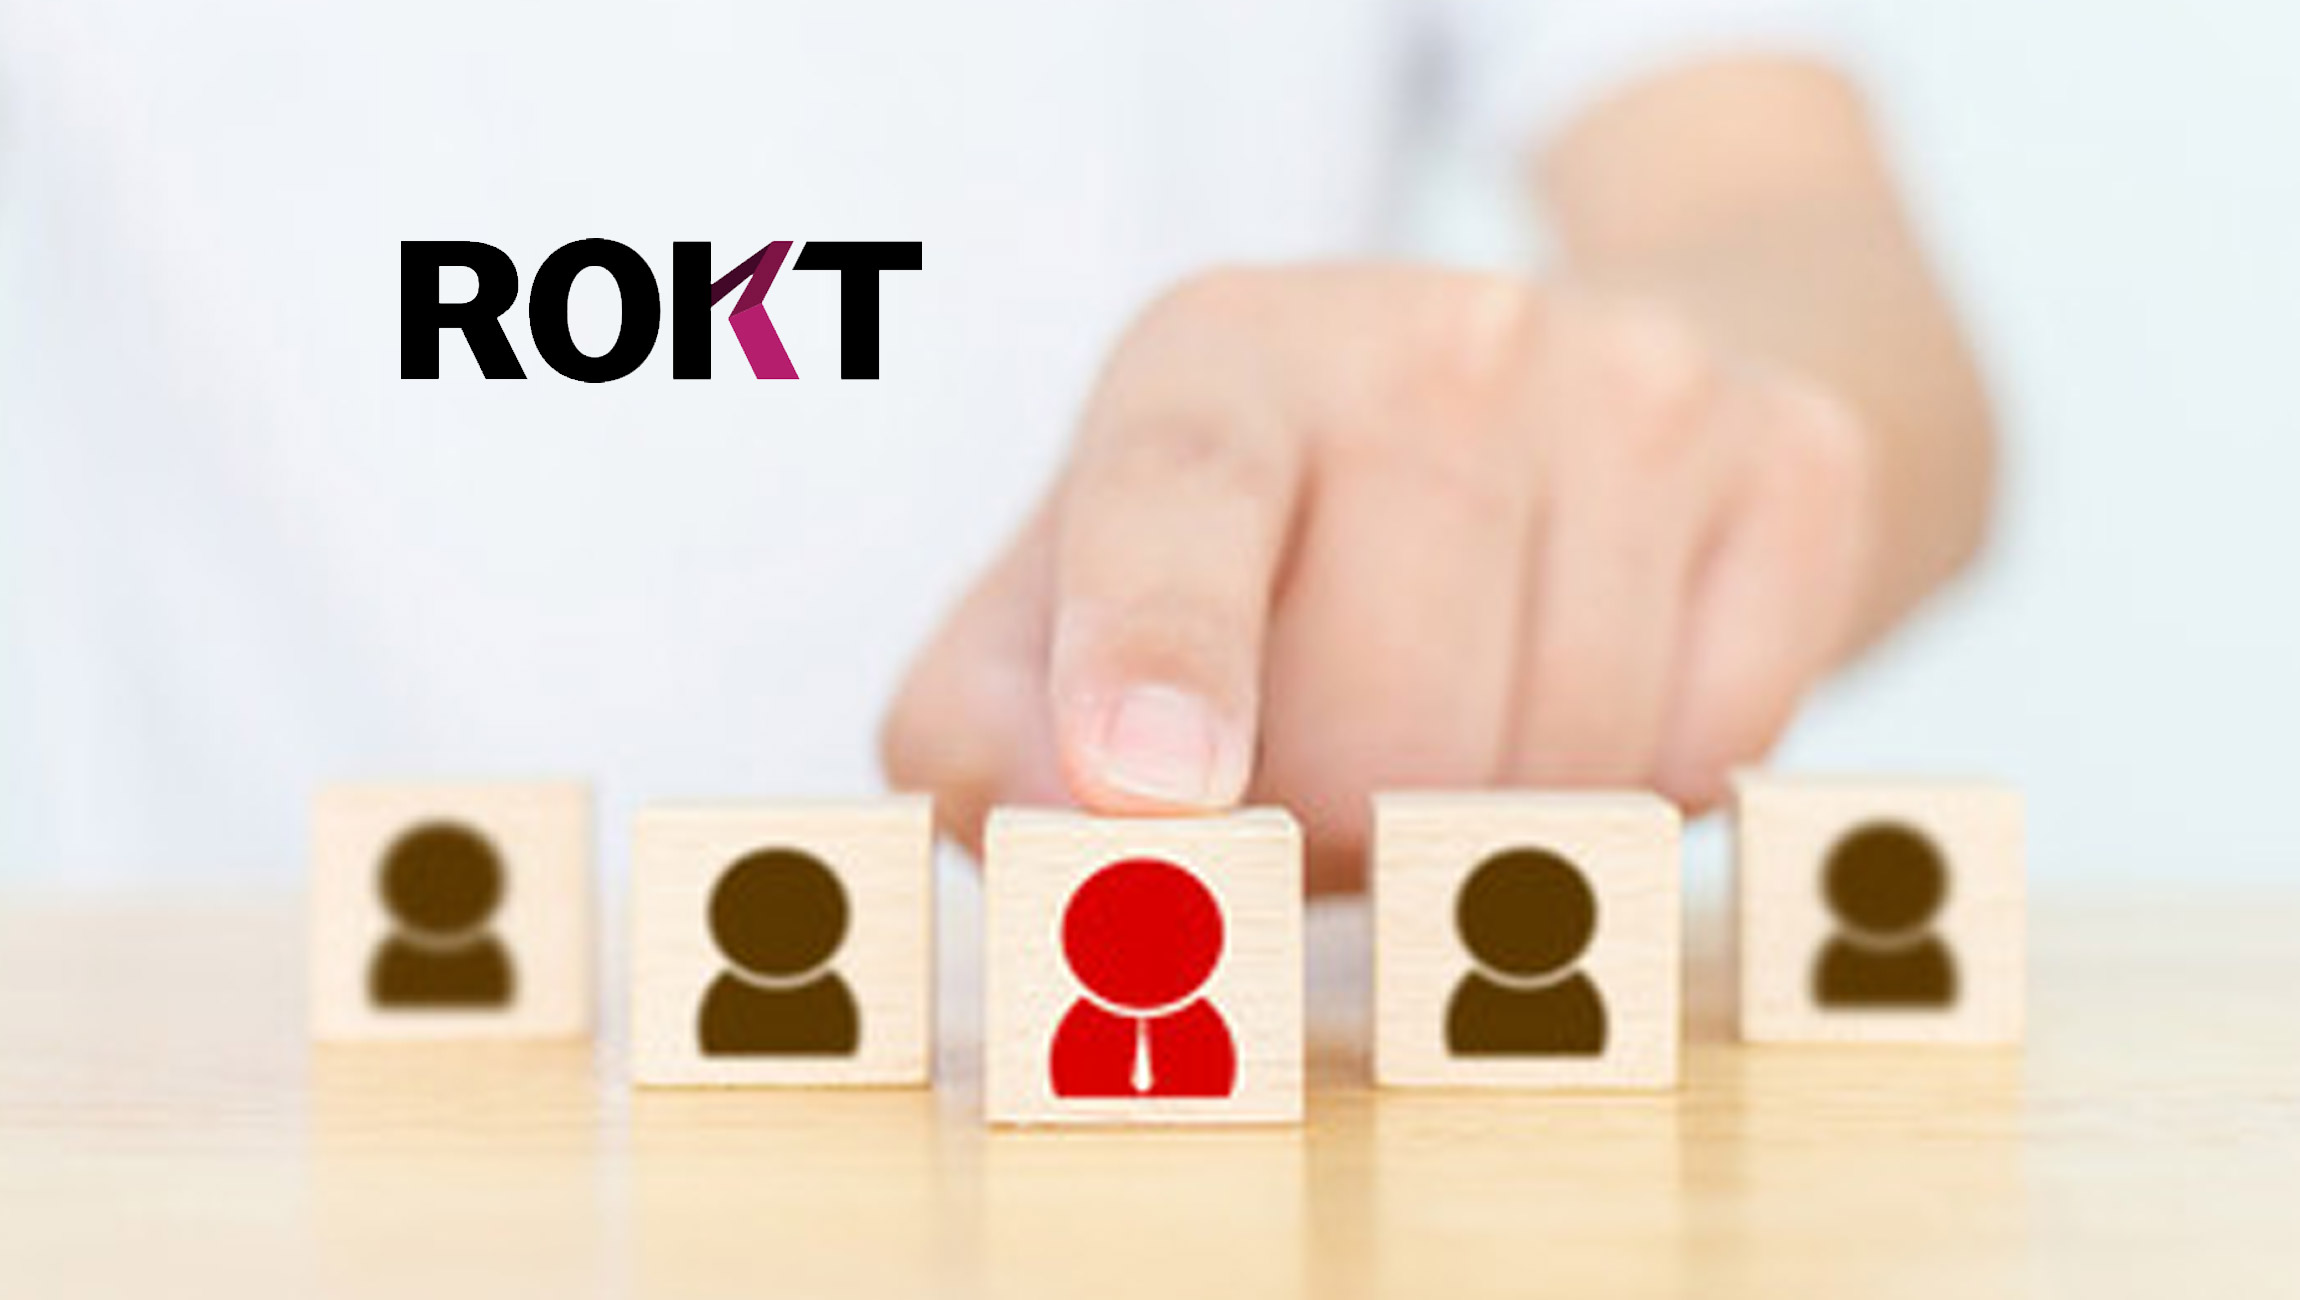 ROKT APPOINTS NATHANIEL KATZ AS CFO AS COMPANY ACCELERATES GROWTH